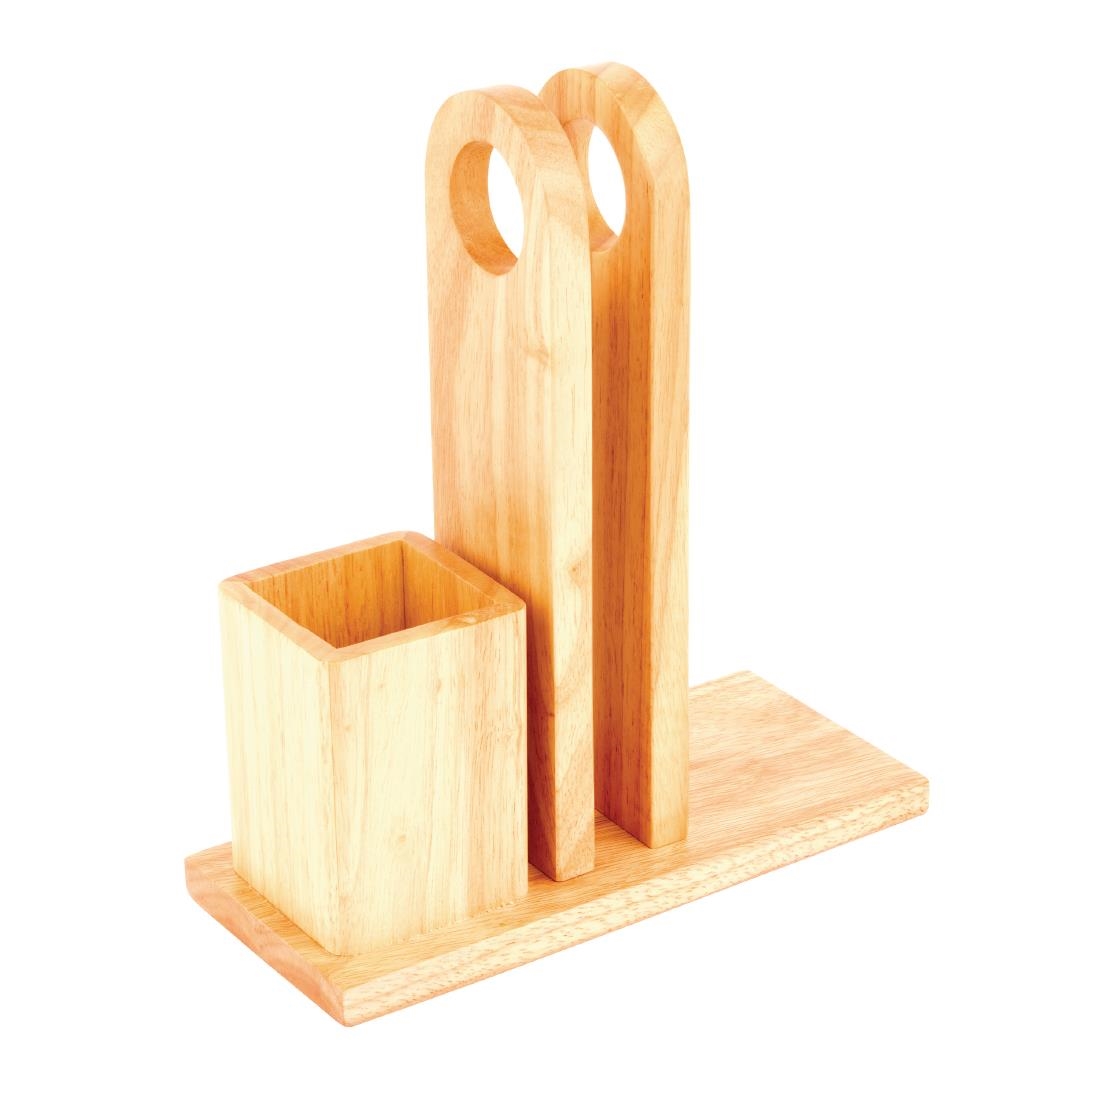 Olympia Wooden Menu Rack with Cutlery Pot